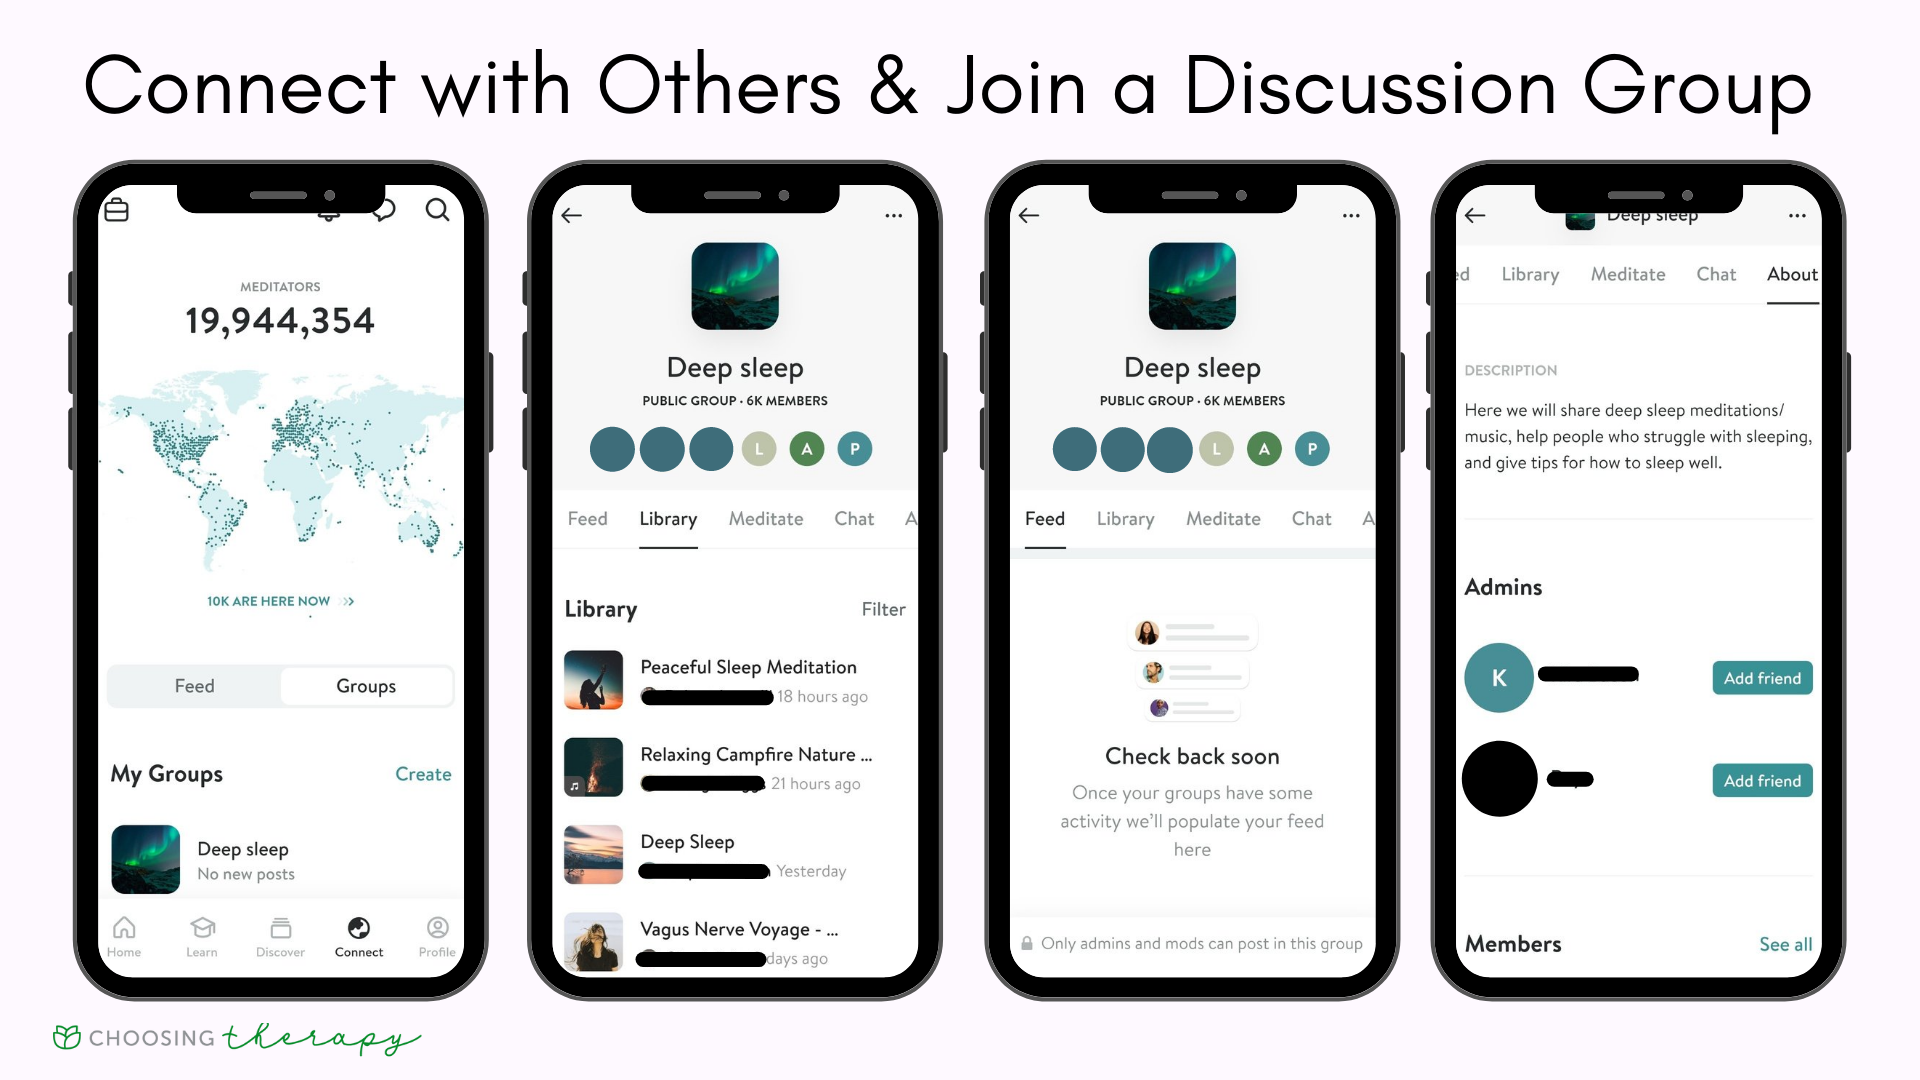 Insight Timer App Review 2022 - Image of Connect hub with the deep sleep discussion group highlighted